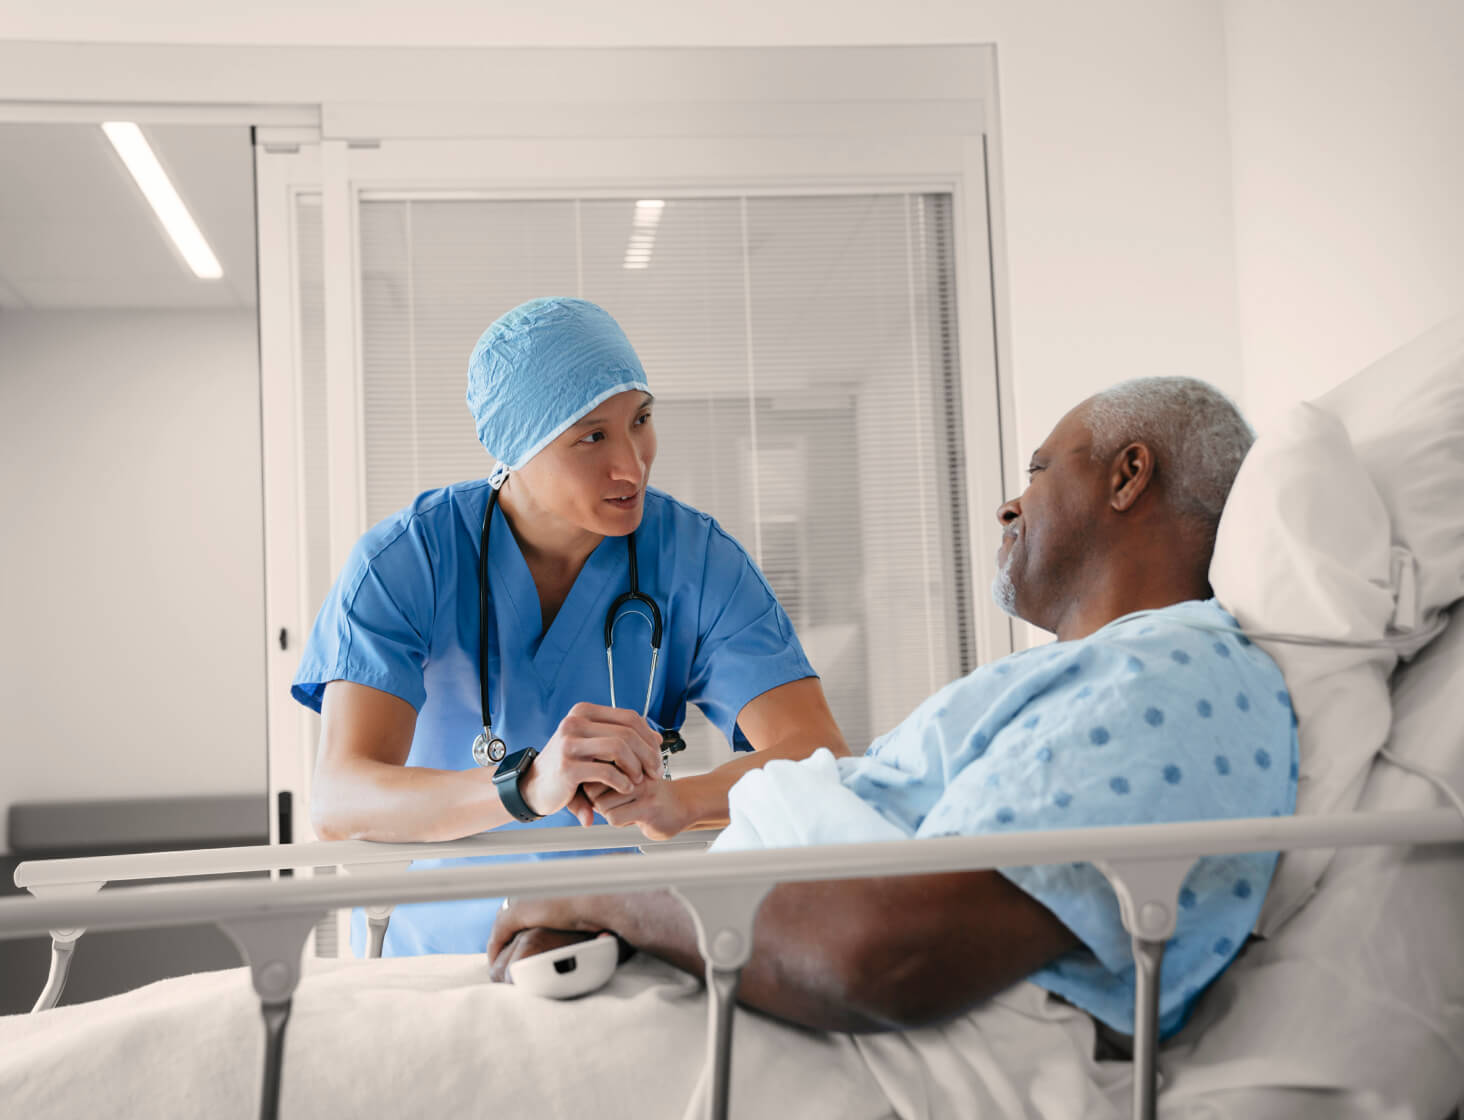 Patient sitting in hospital bed talking with healthcare professional